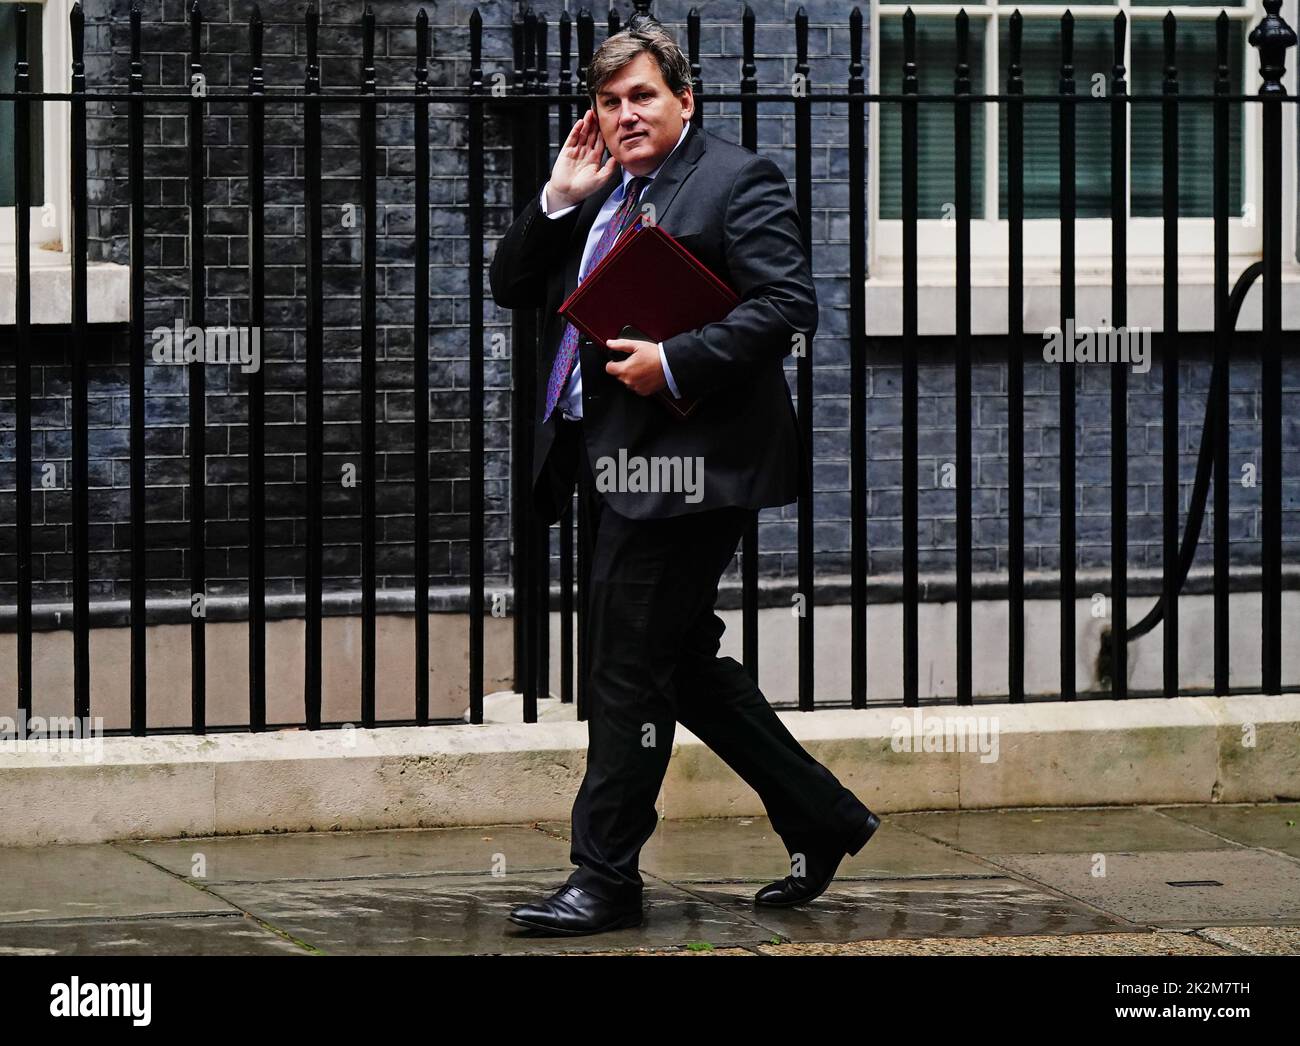 Education Secretary Kit Malthouse arrives for a cabinet meeting at 10 Downing Street, London, ahead of a mini-budget announcement by Chancellor of the Exchequer Kwasi Kwarteng. Picture date: Friday September 23, 2022. Stock Photo